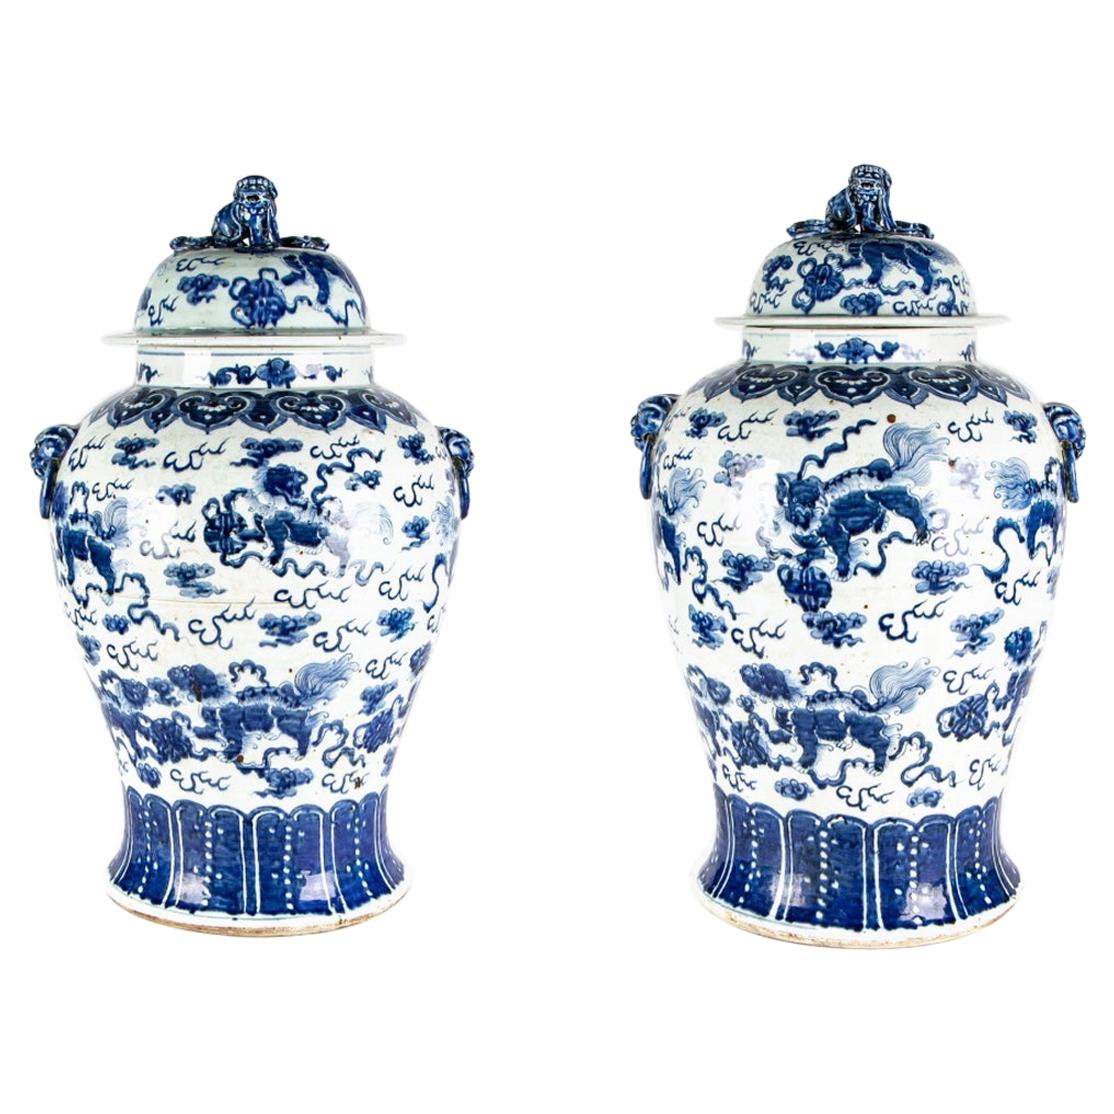 Older Pair of Large Scale Chinese Blue and White Ginger Jars